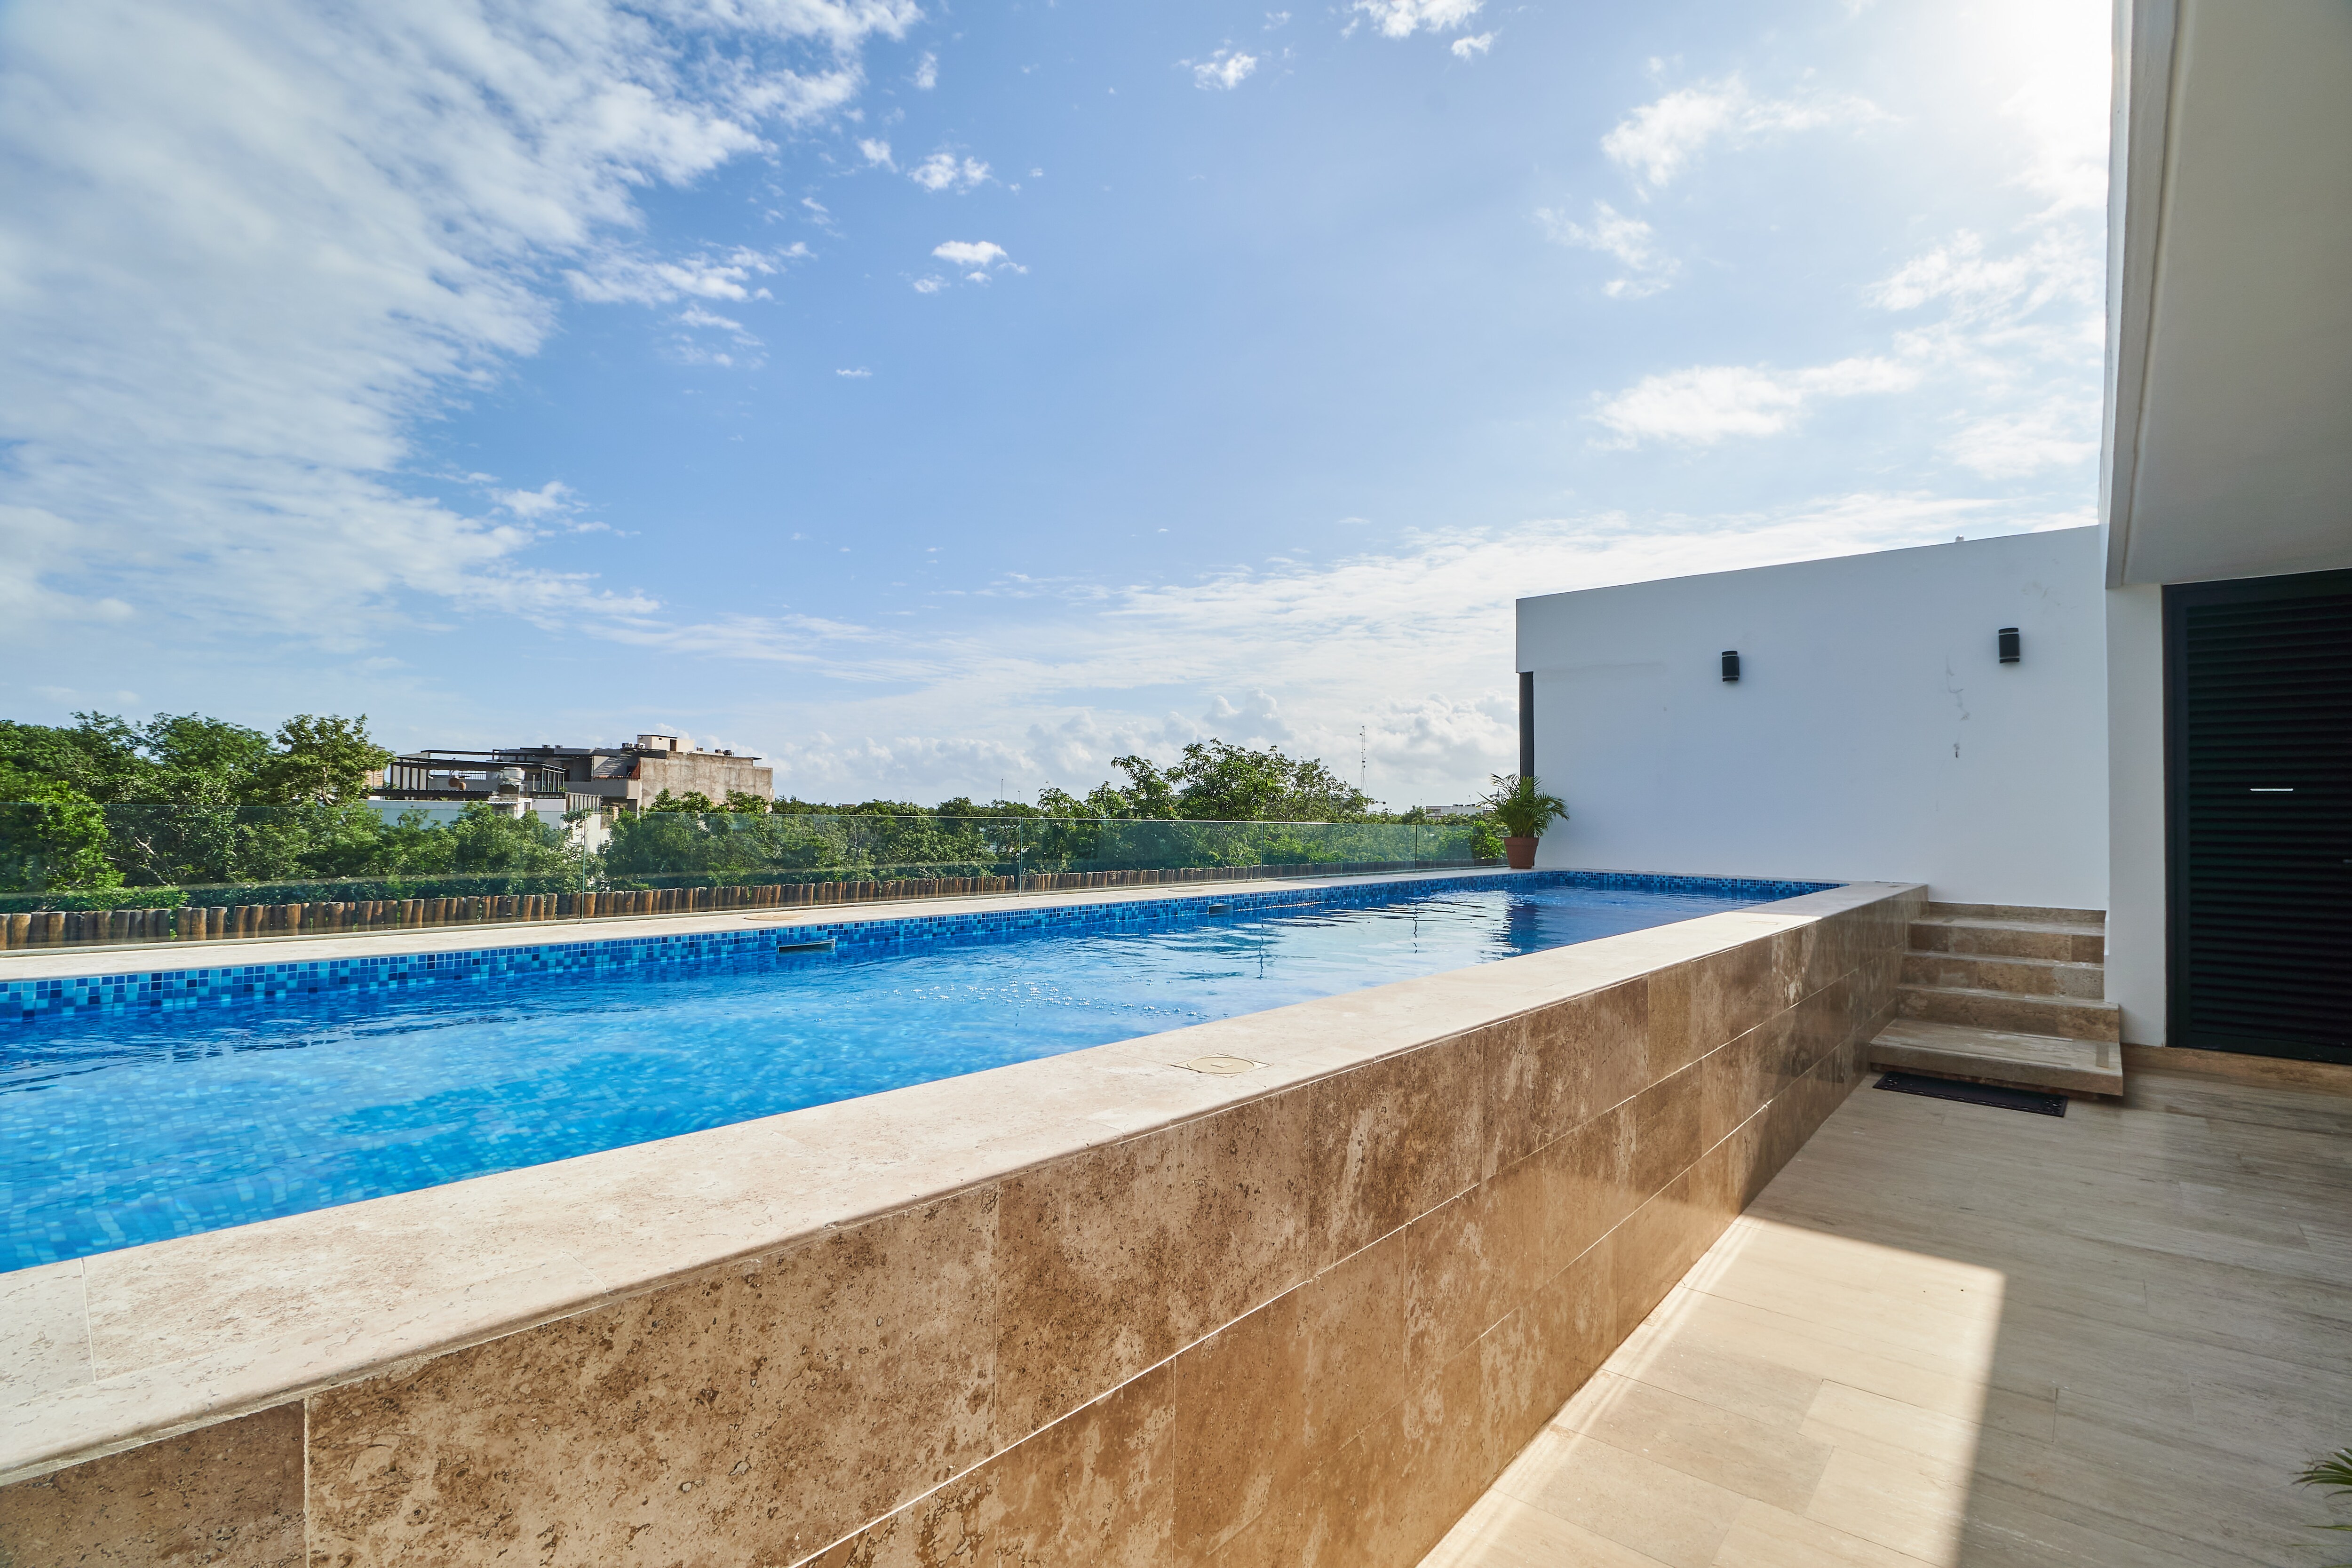 Property Image 1 - Modern & Peaceful Apartment | Nice Location in Aldea Zama | Rooftop, Infinity Pool & Lounge